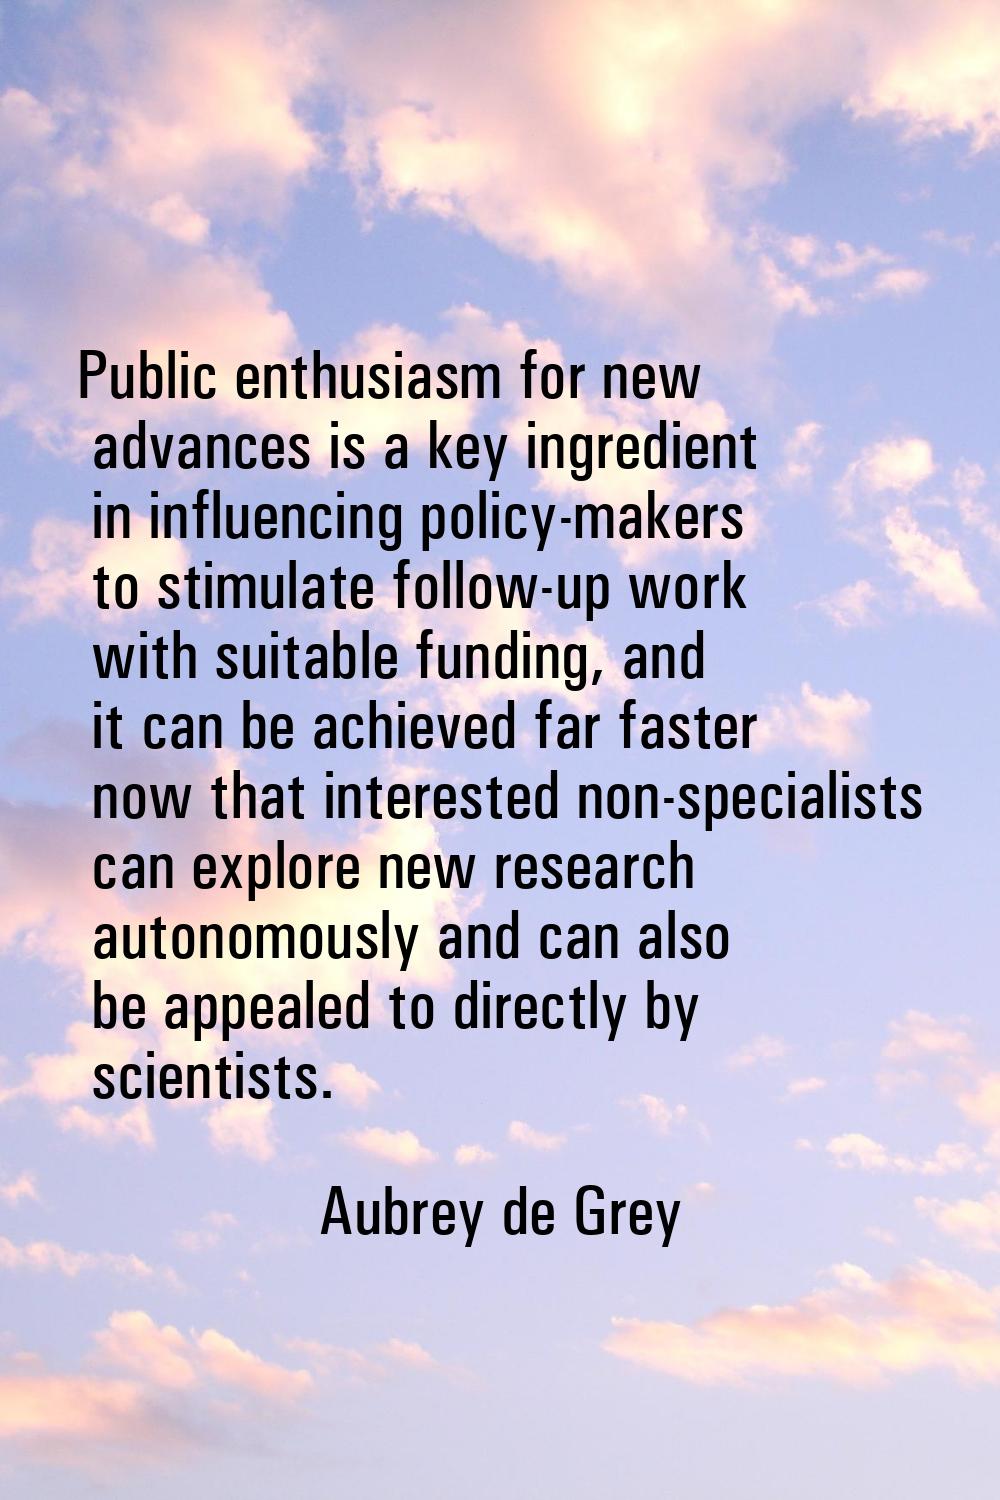 Public enthusiasm for new advances is a key ingredient in influencing policy-makers to stimulate fo